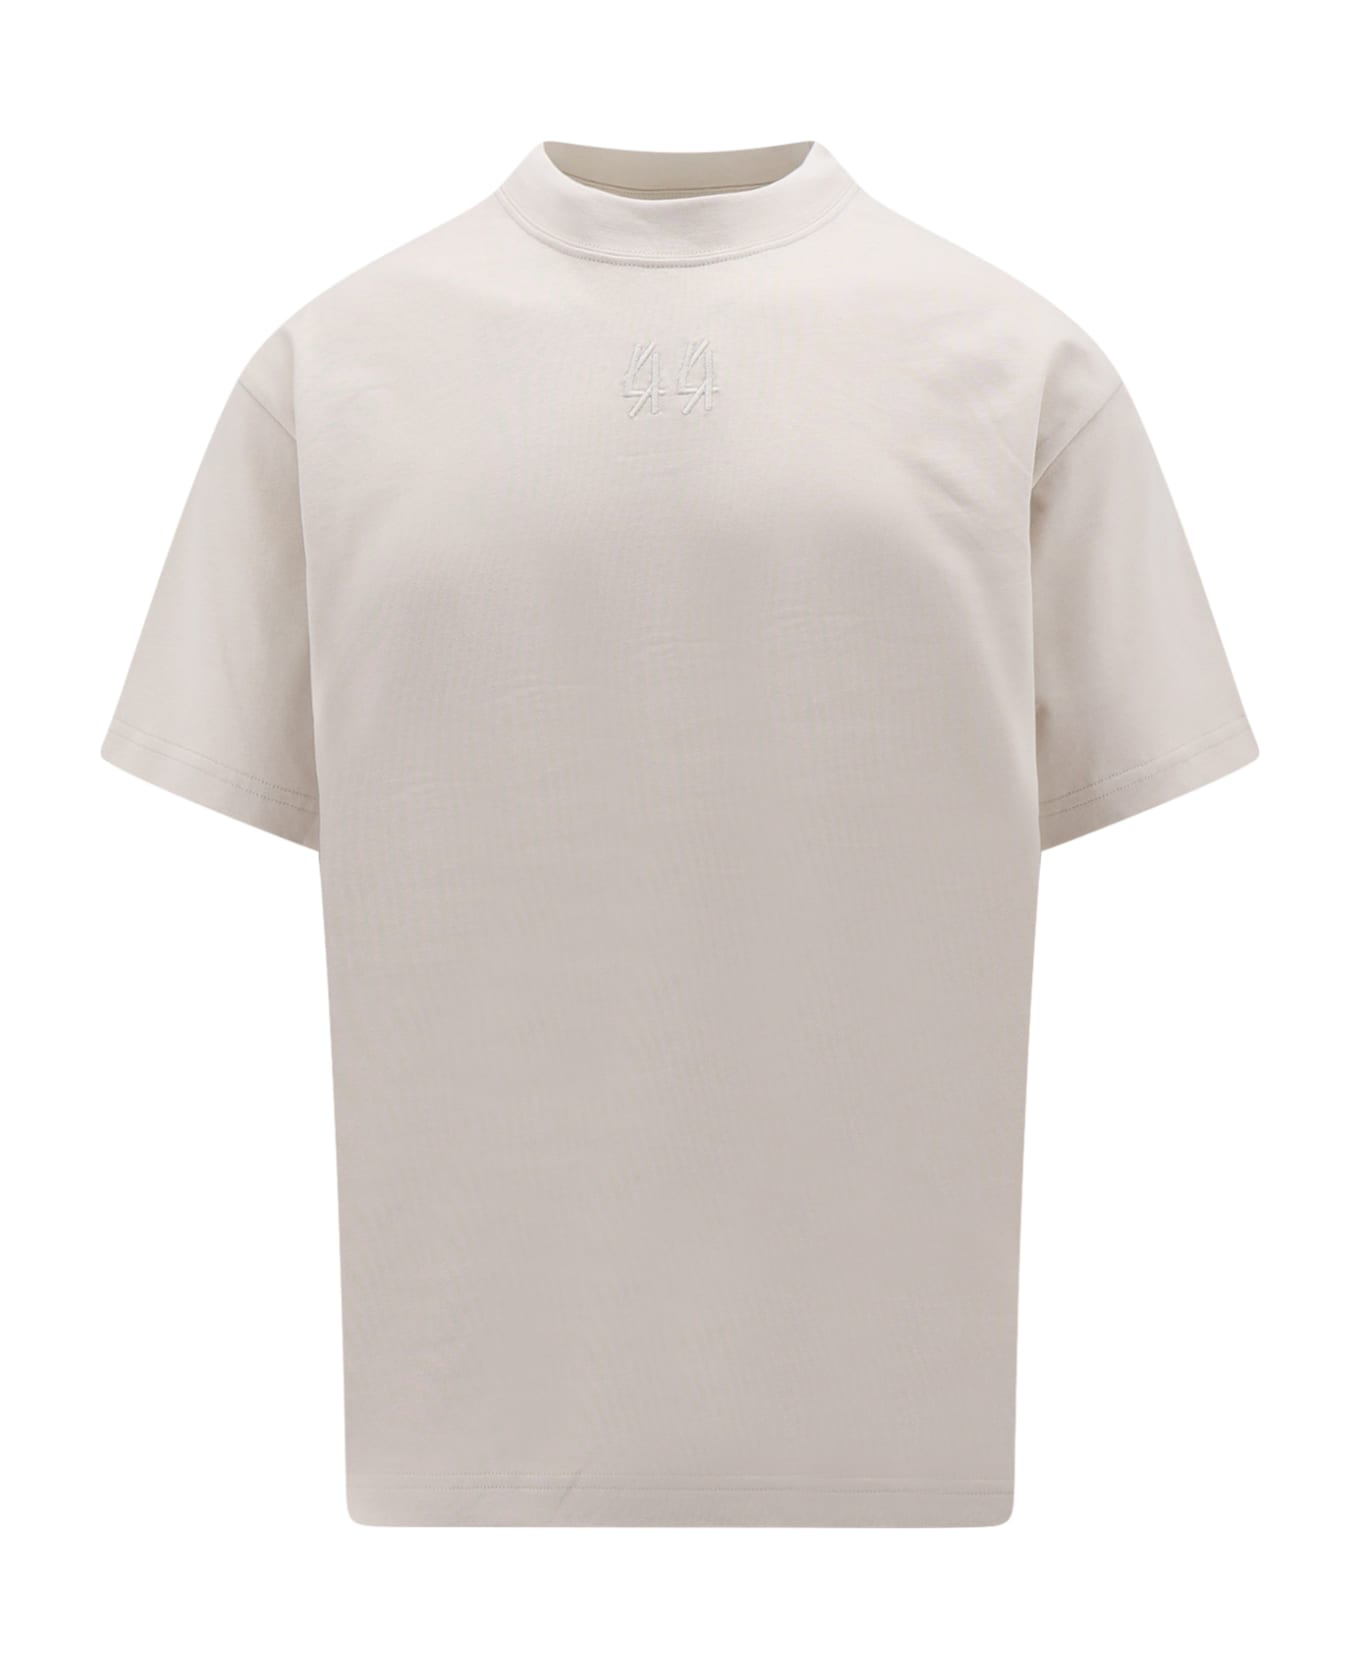 44 Label Group T-shirt - White